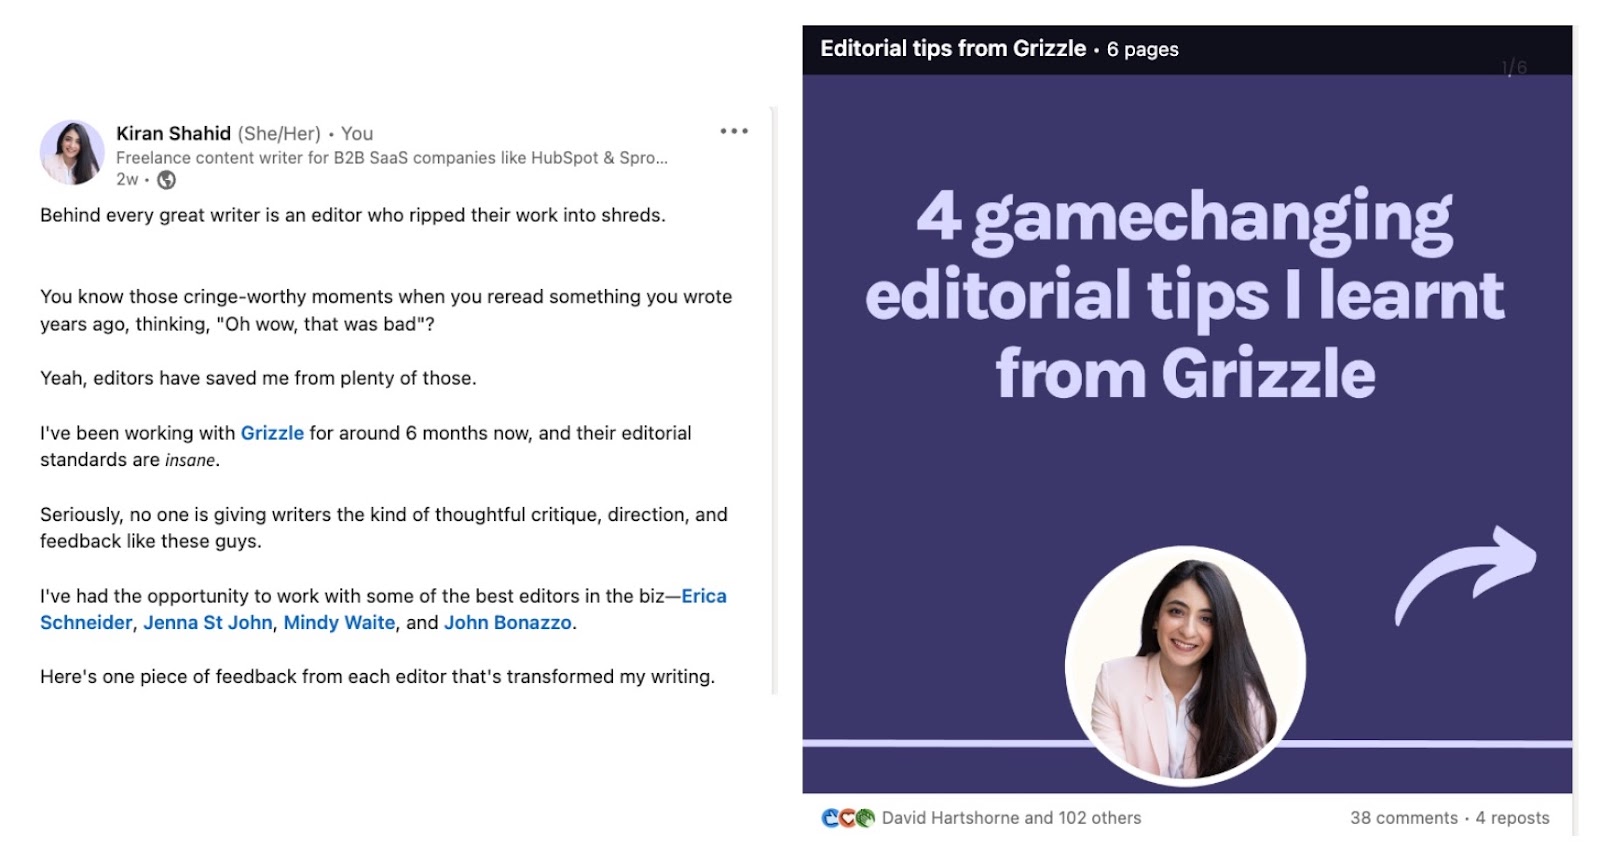 Kiran Shahid's LinkedIn post on 4 gamechanging editorial tips she learnt from Grizzle